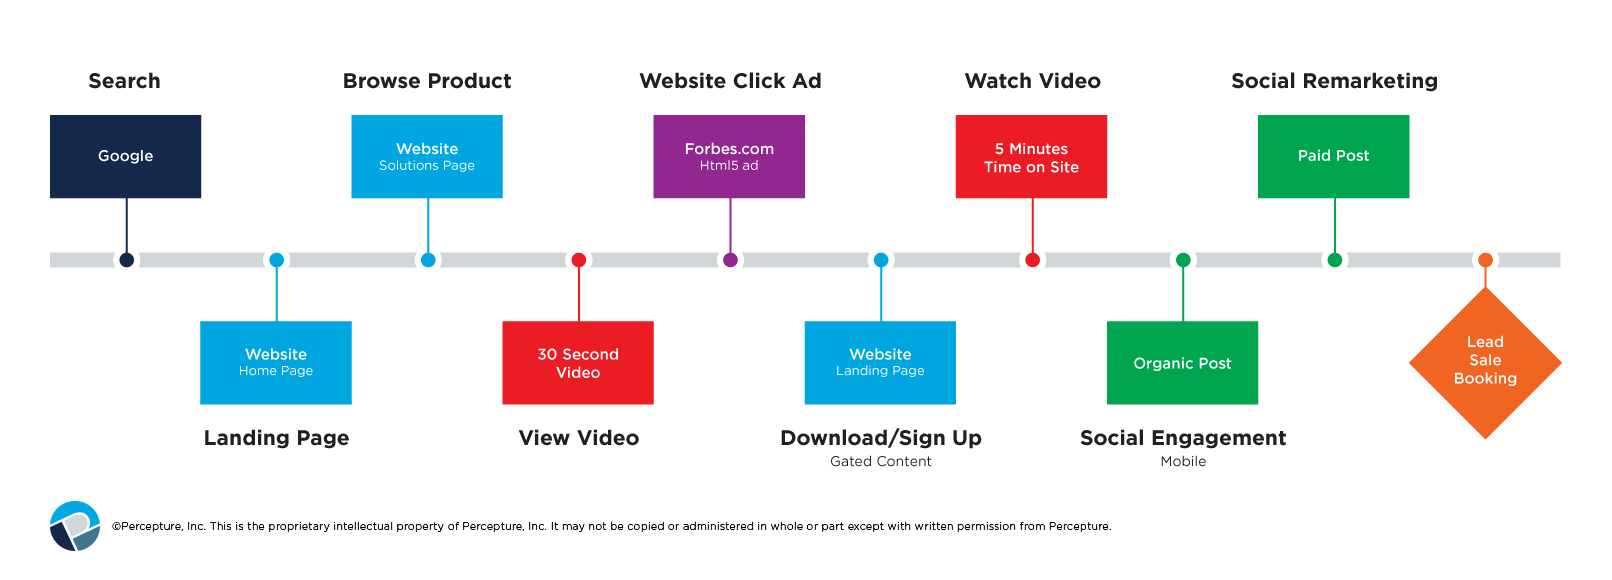 a mapped strategy in flow chart format and process sample of Percepture's omnichannel marketing services.